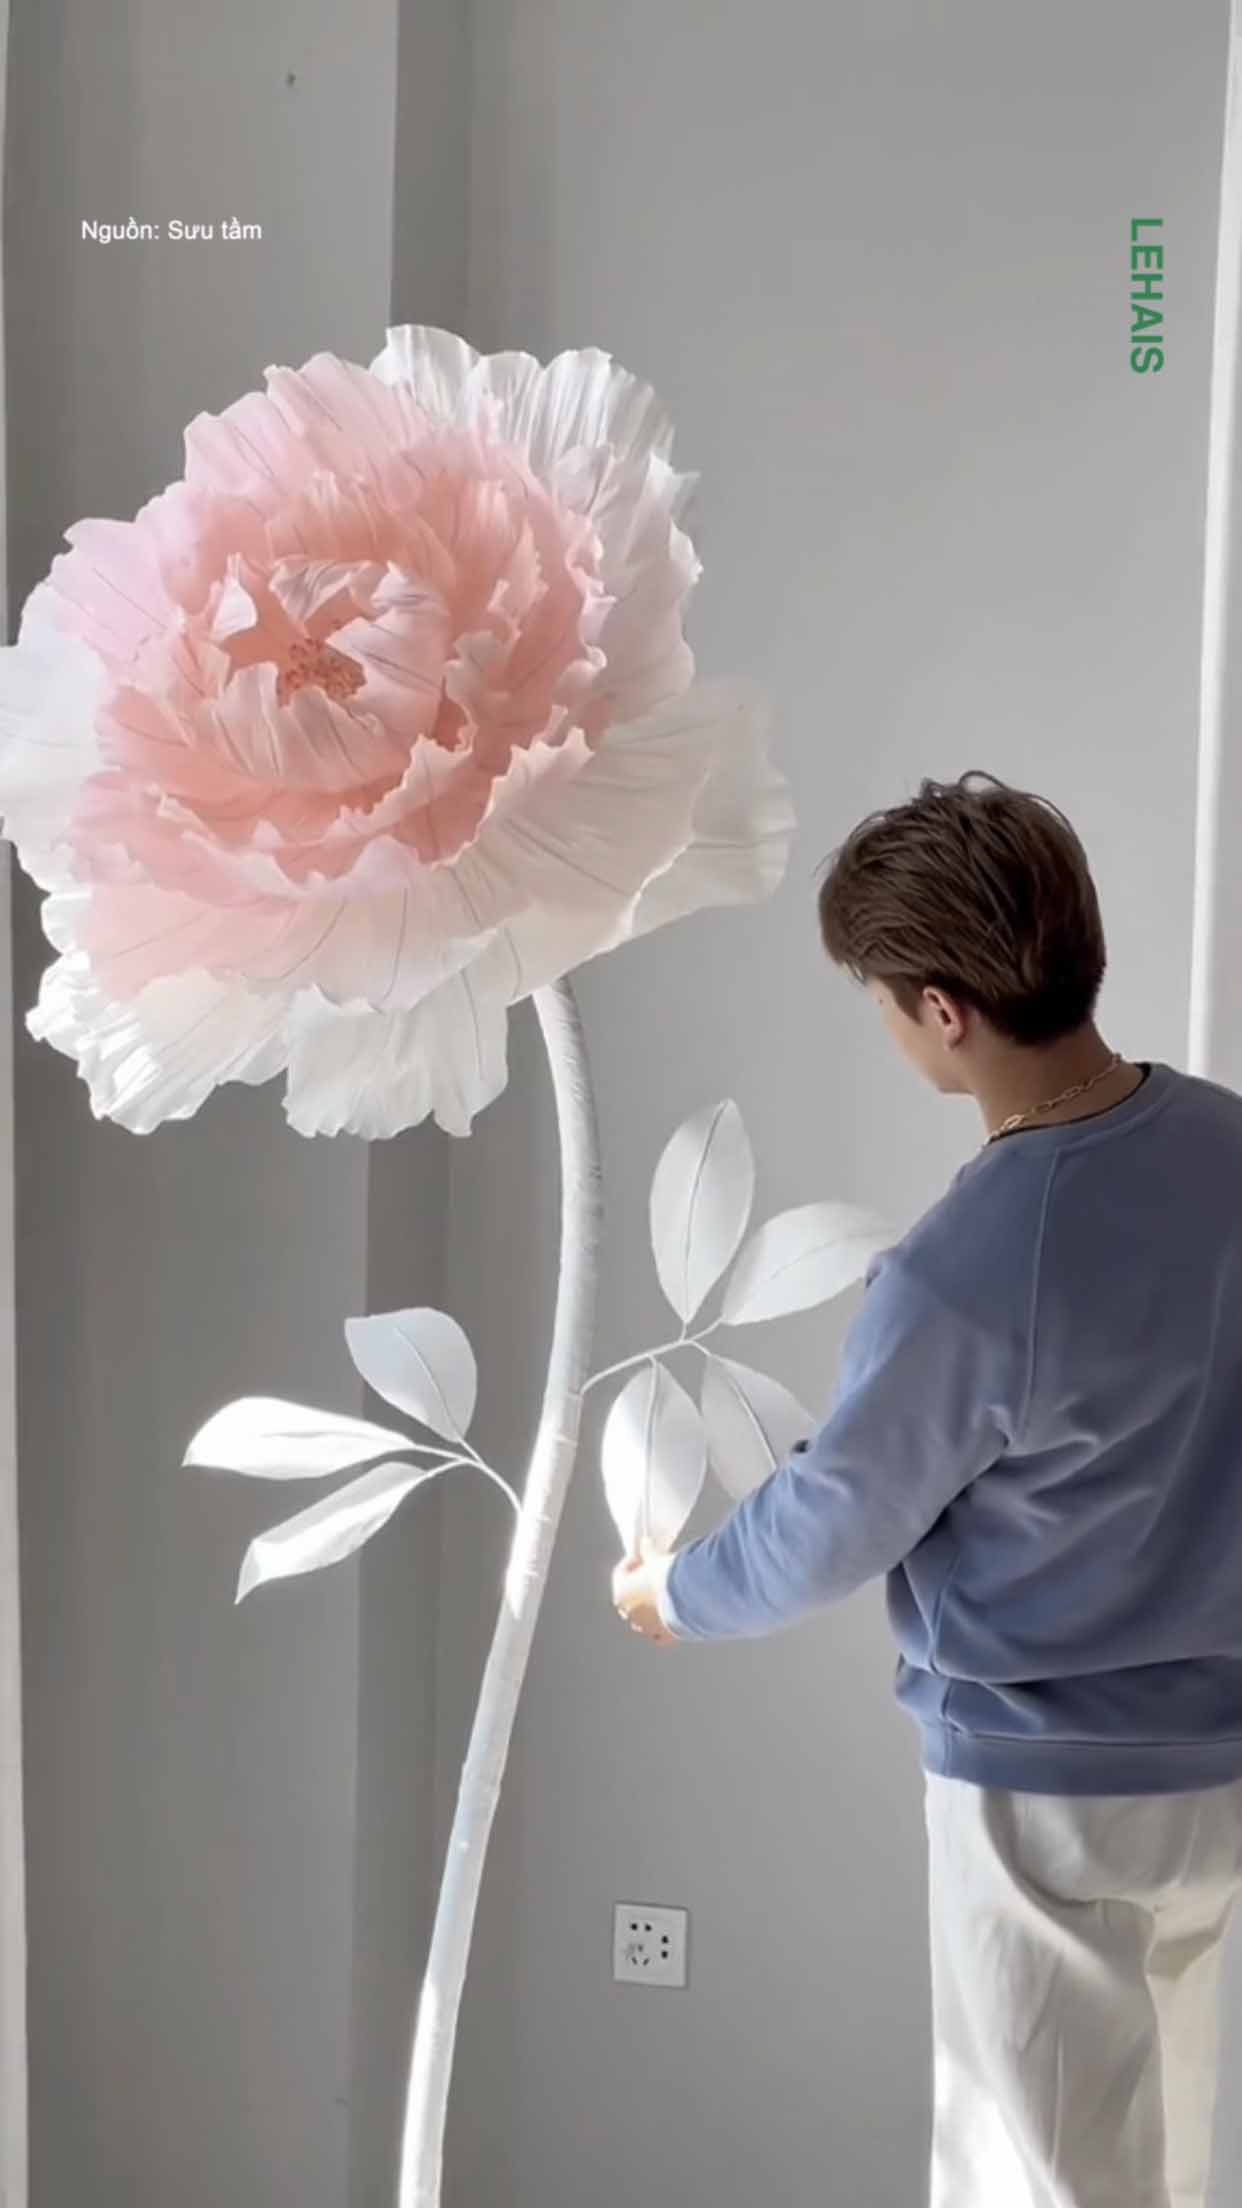 The night light is made from the idea of a flower 1